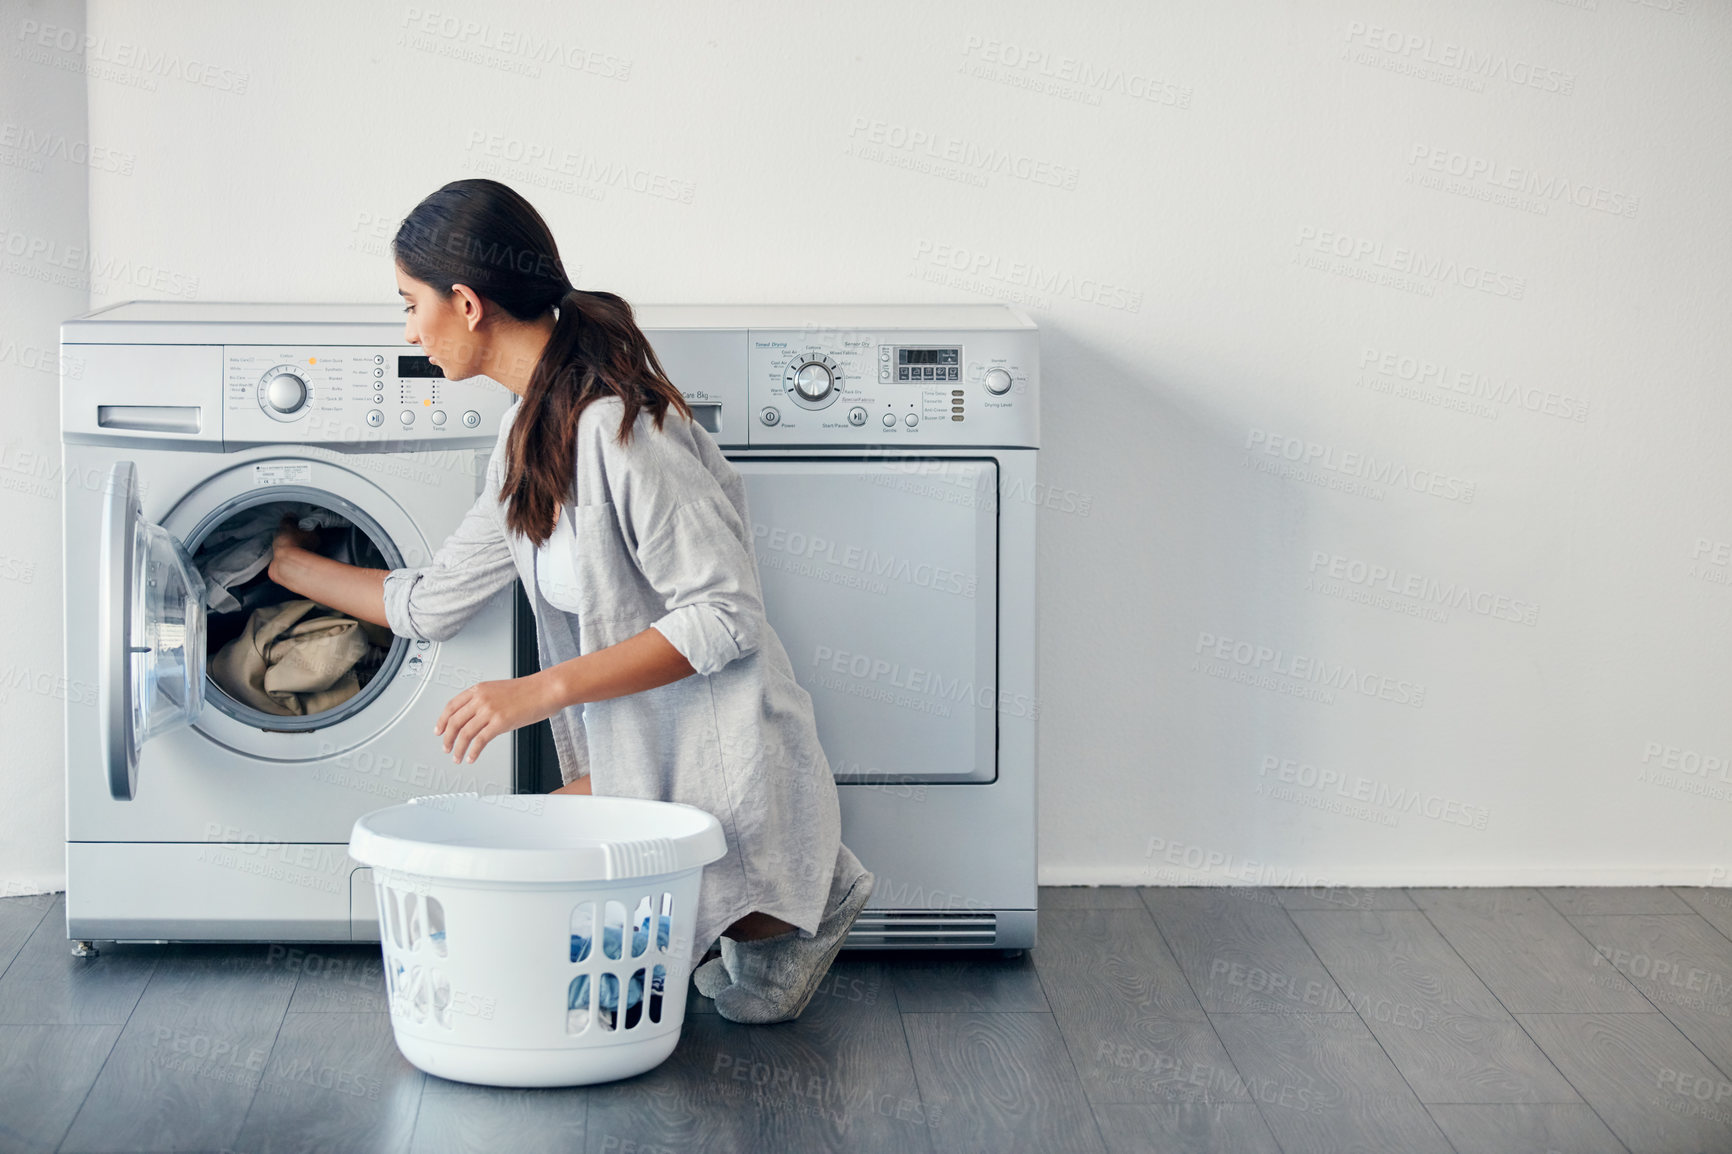 Buy stock photo Shot of a young attractive woman doing her laundry at home